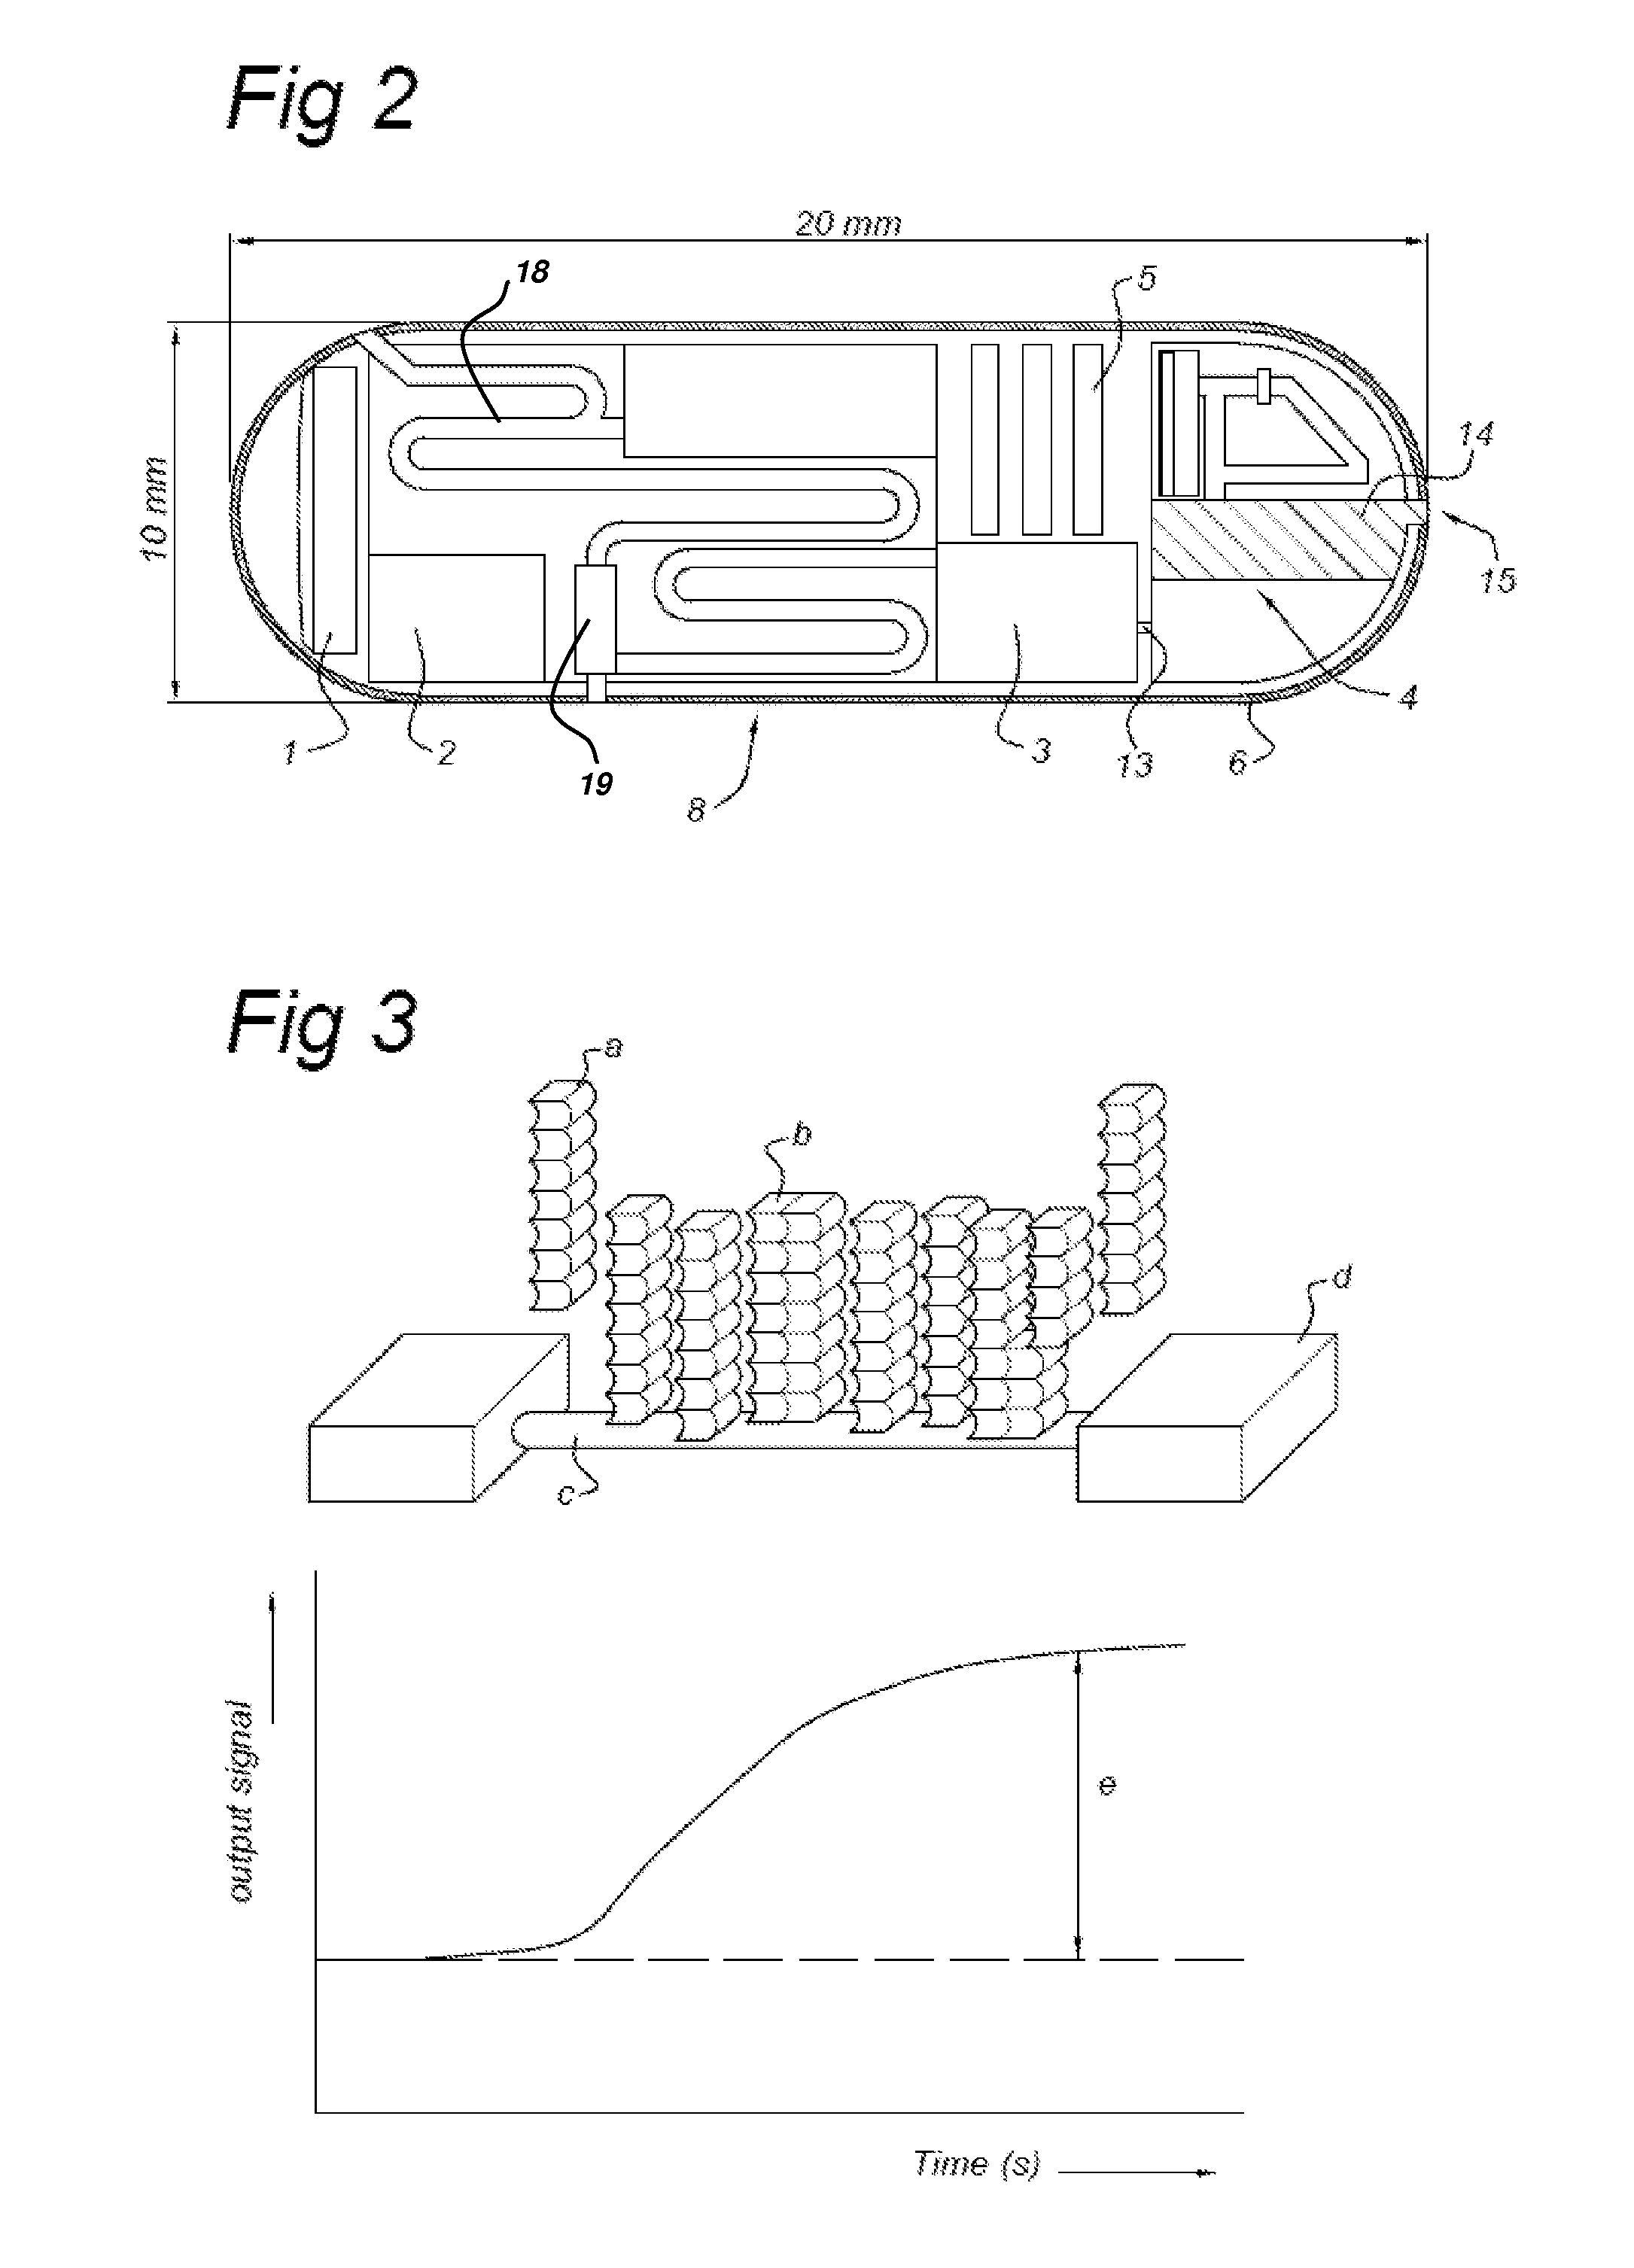 Device for detecting a medical condition or disease